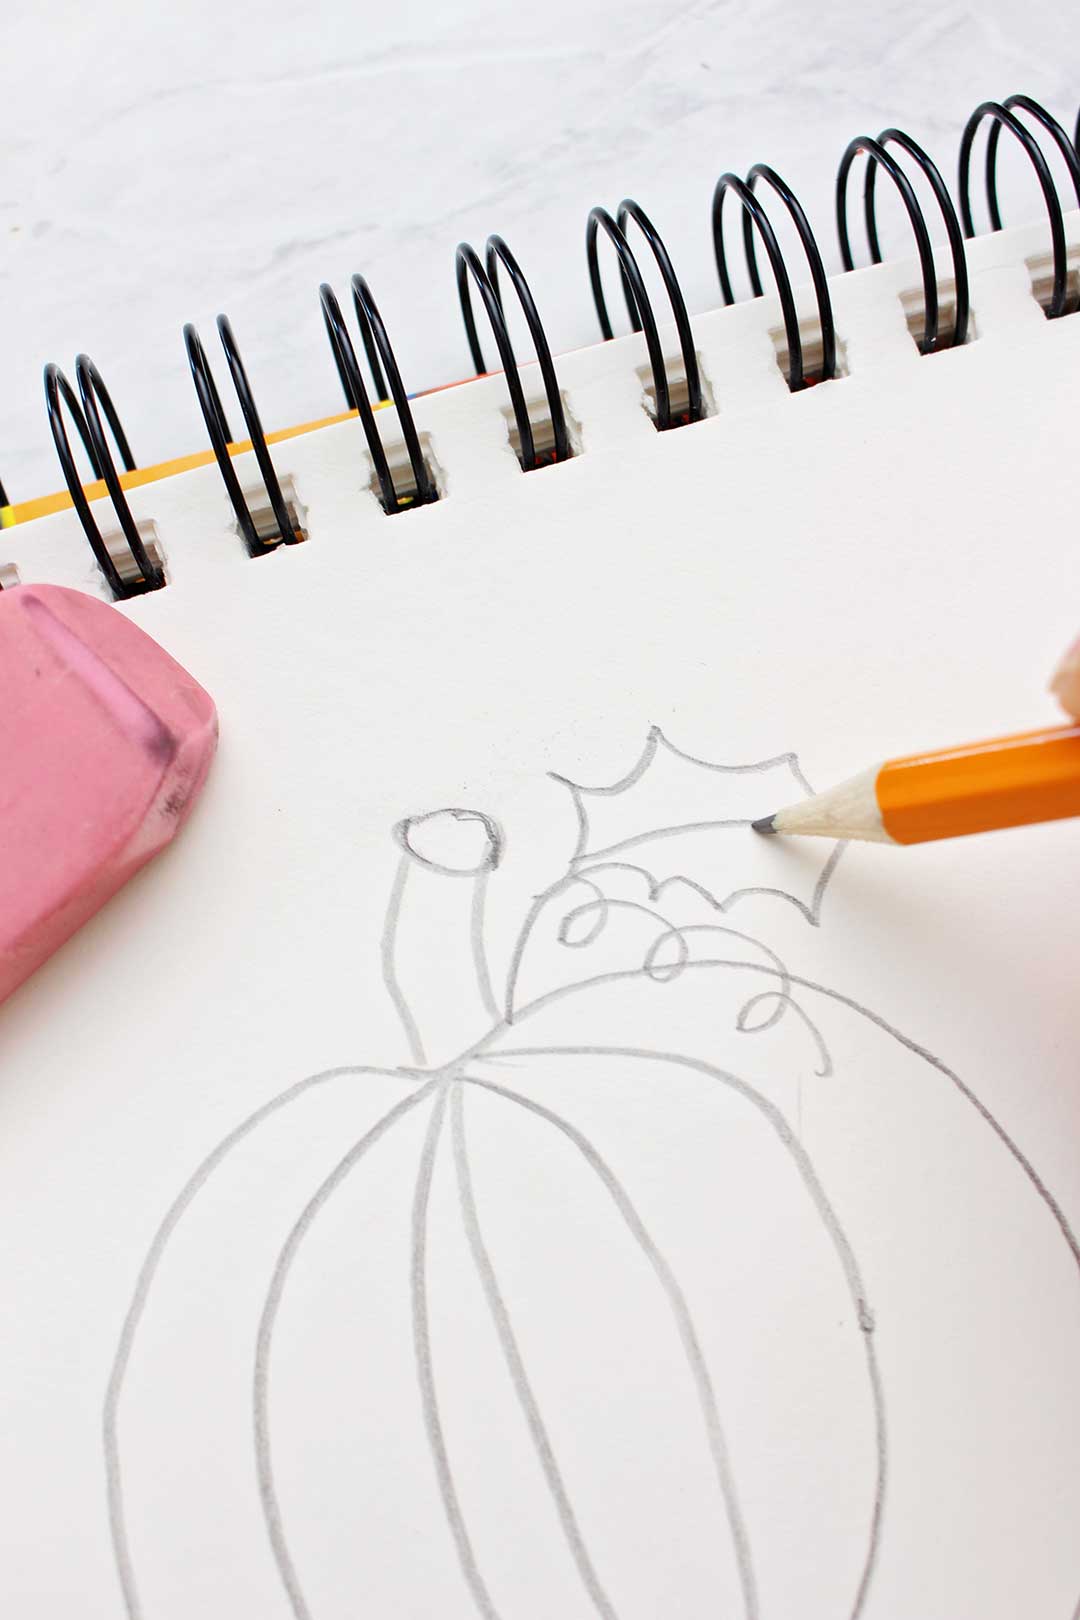 Pencil sketching the stem and leaf of a pumpkin sketch.